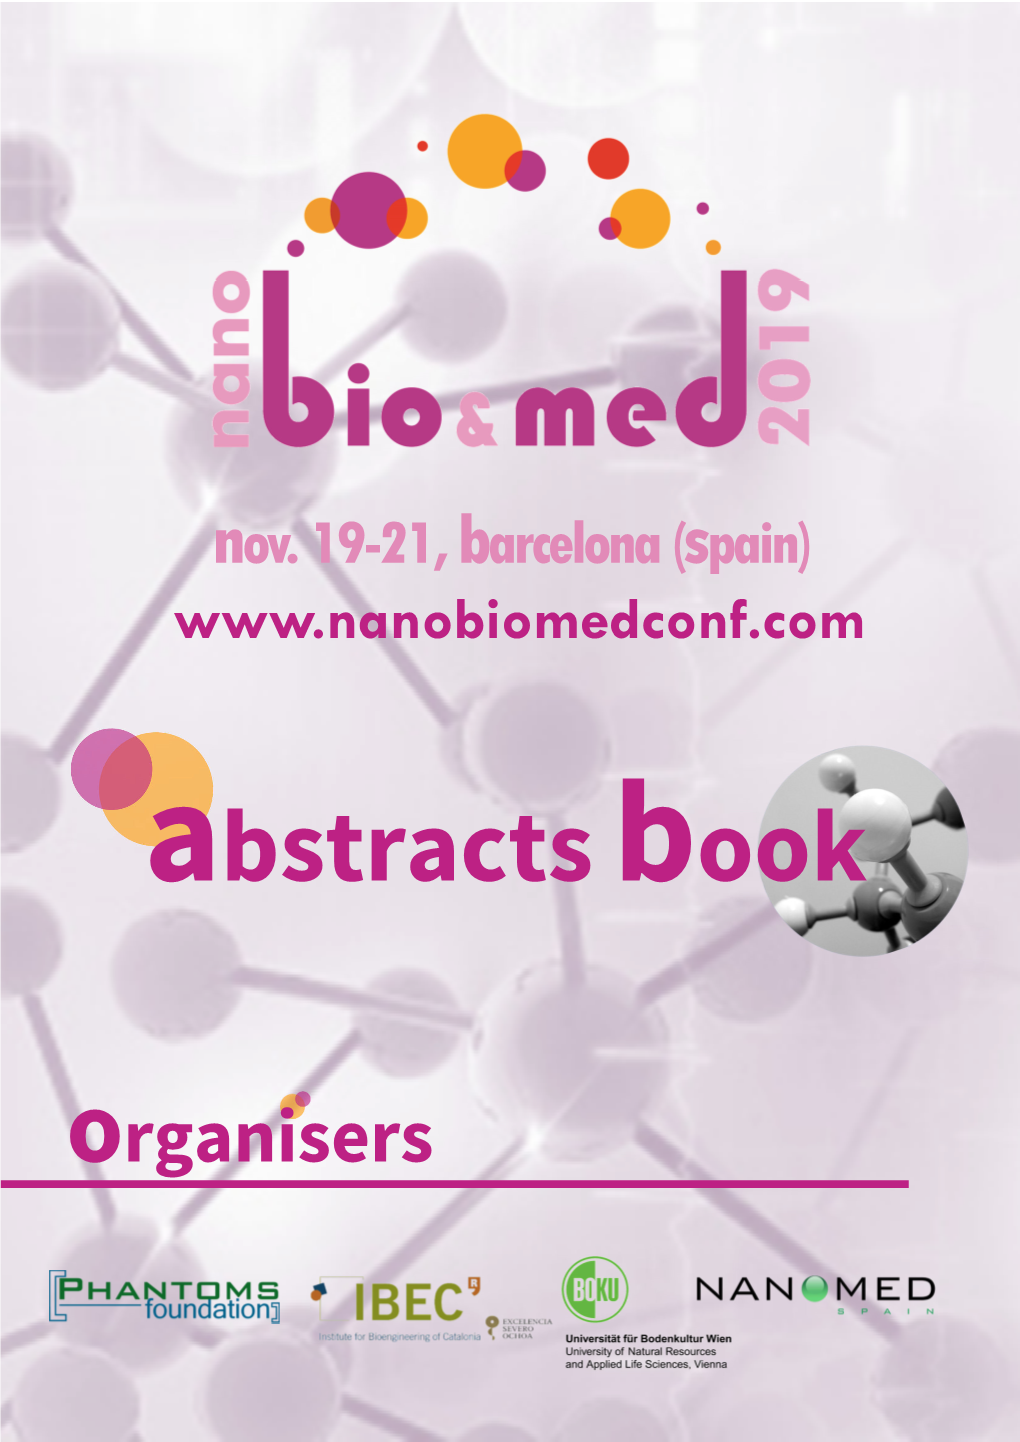 Nanobiomed2019 Abstracts Book